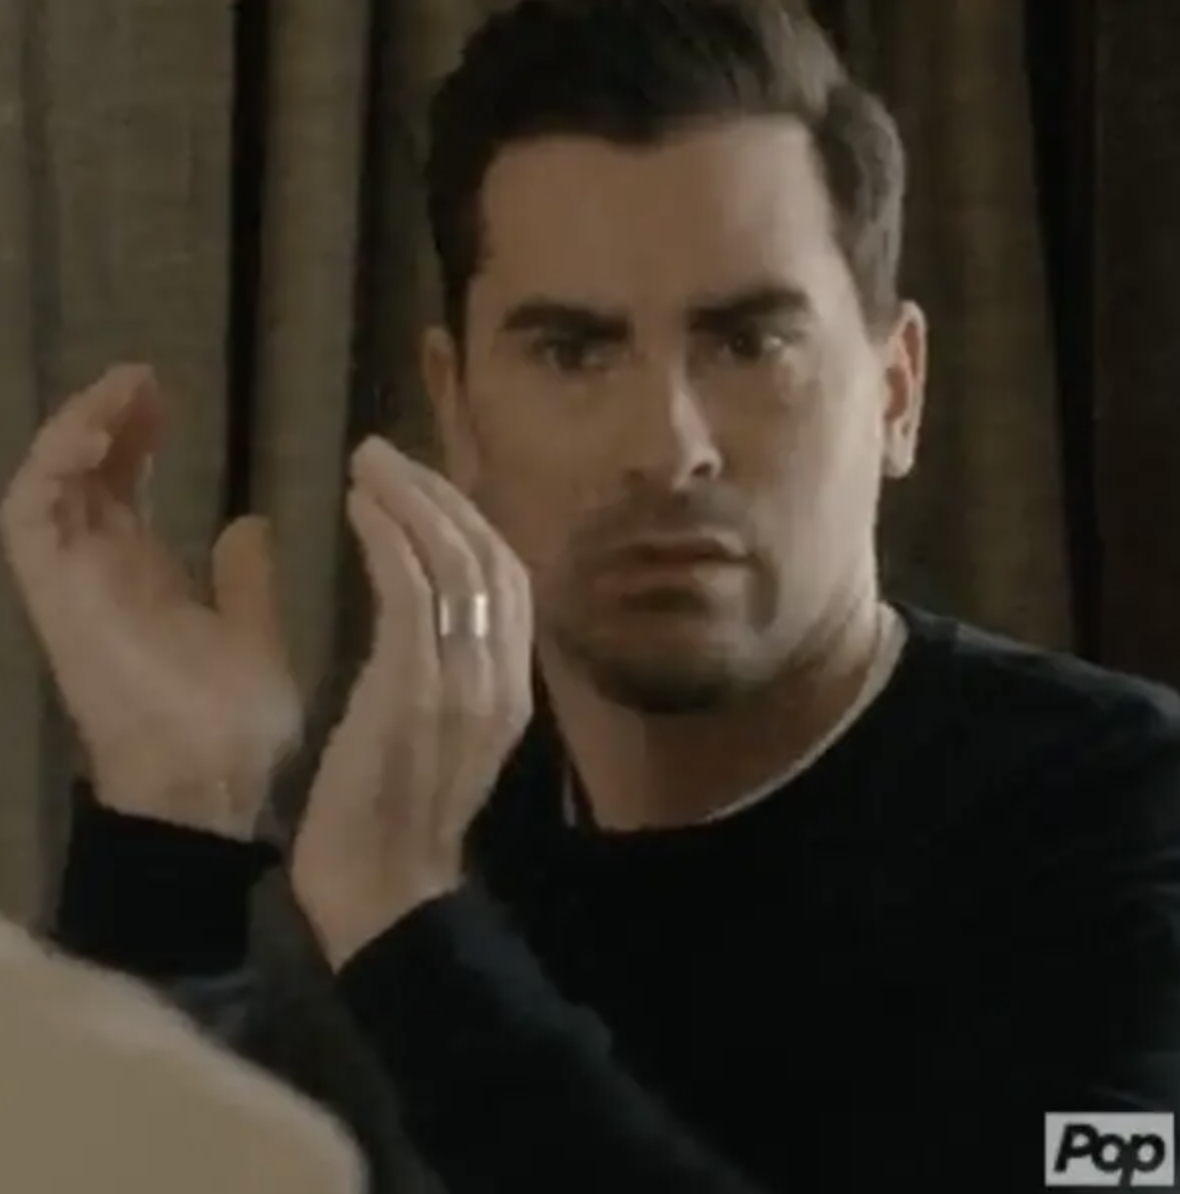 David from Schitt&#x27;s Creek clapping but looking concerned